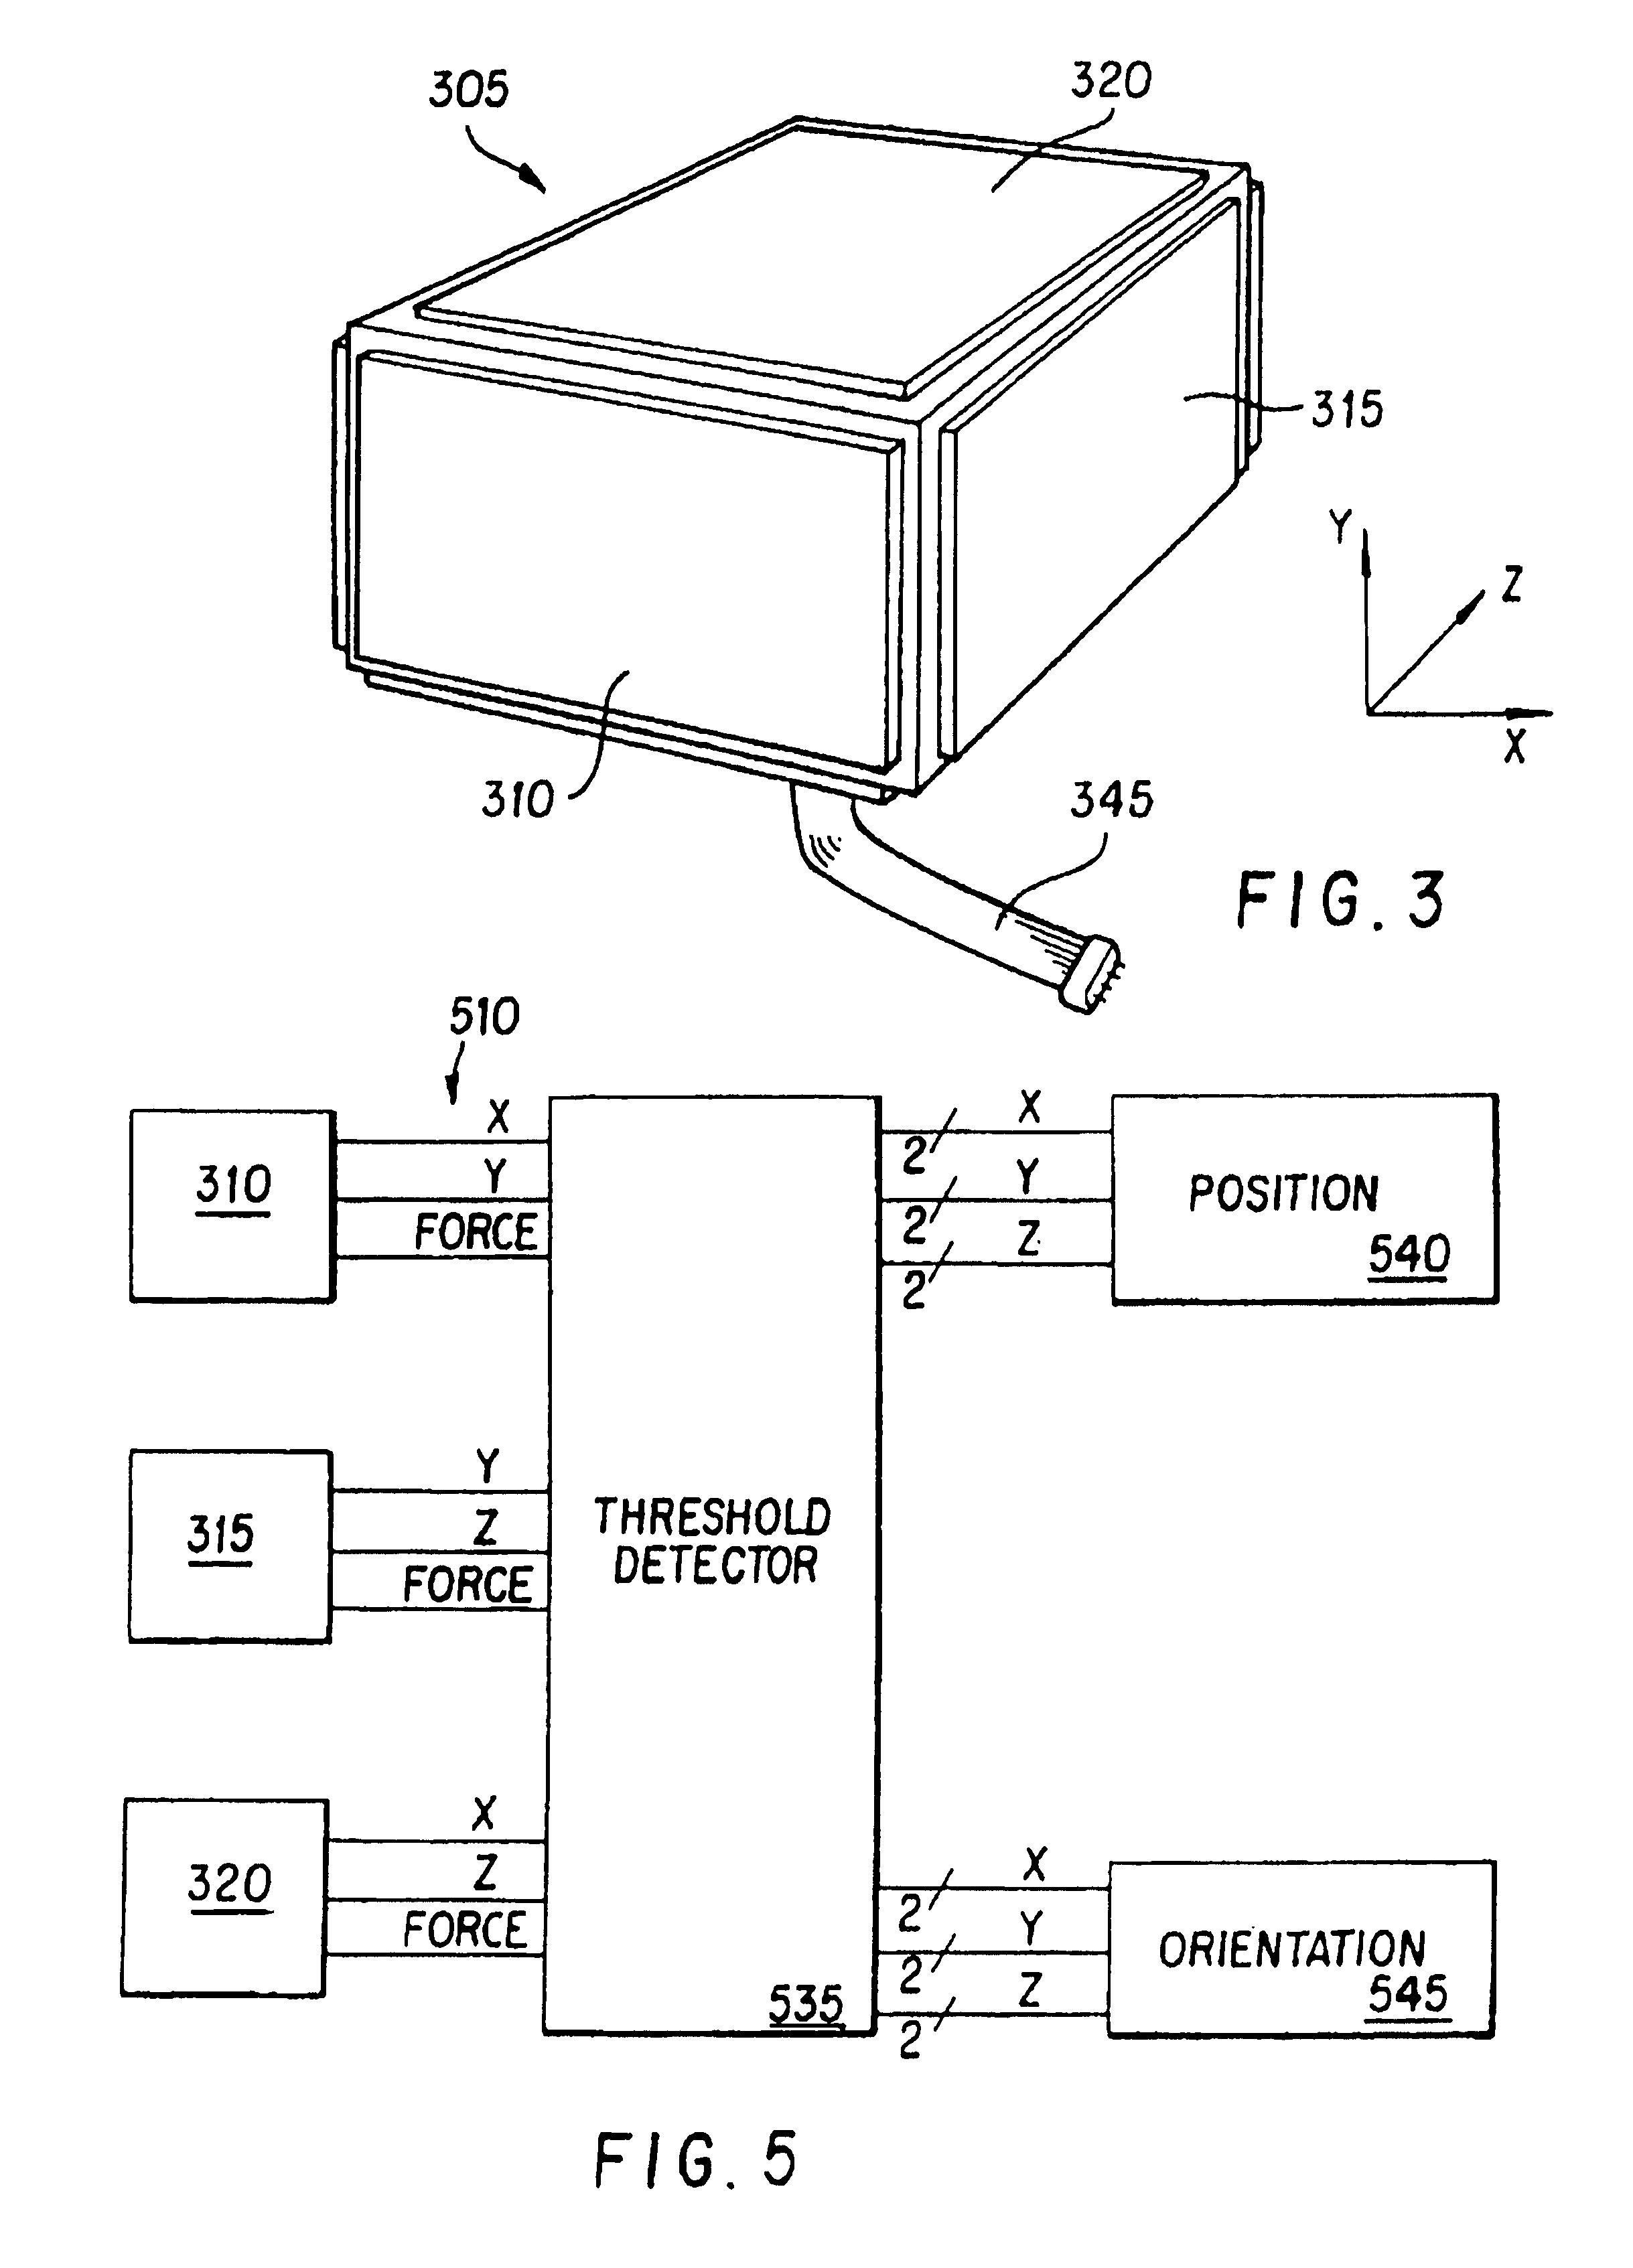 Methods and apparatus for providing touch-sensitive input in multiple degrees of freedom